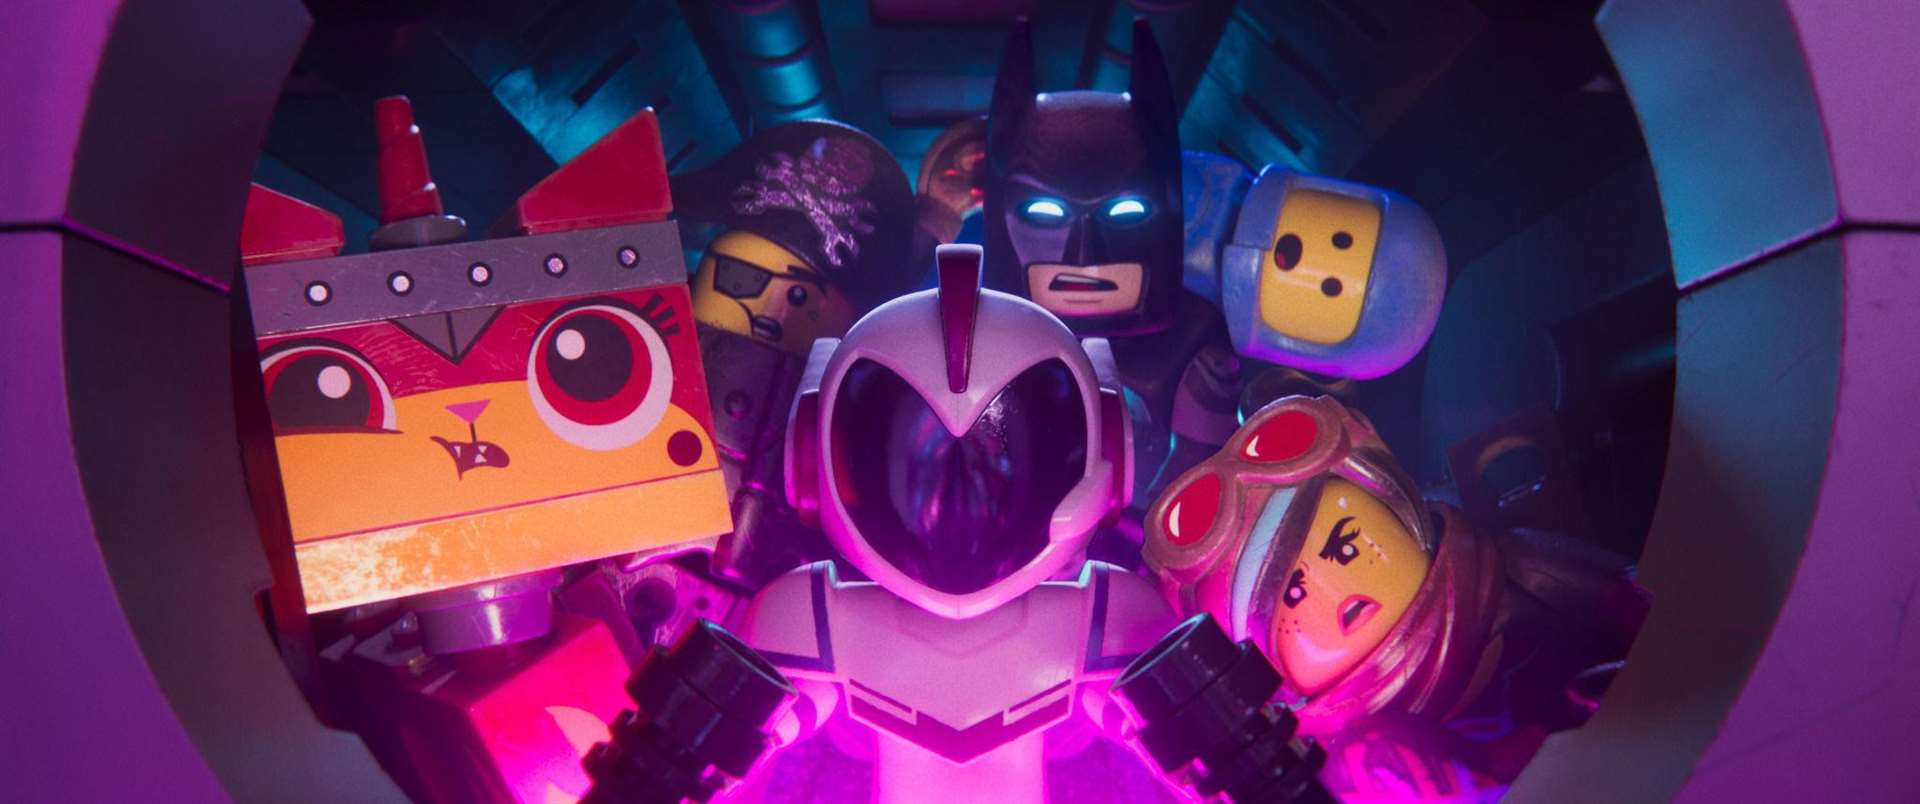 Can Emmett and his friends restore their LEGO world? Picture credit: PA Photo/Warner Bros. Entertainment Inc. All Rights Reserved.